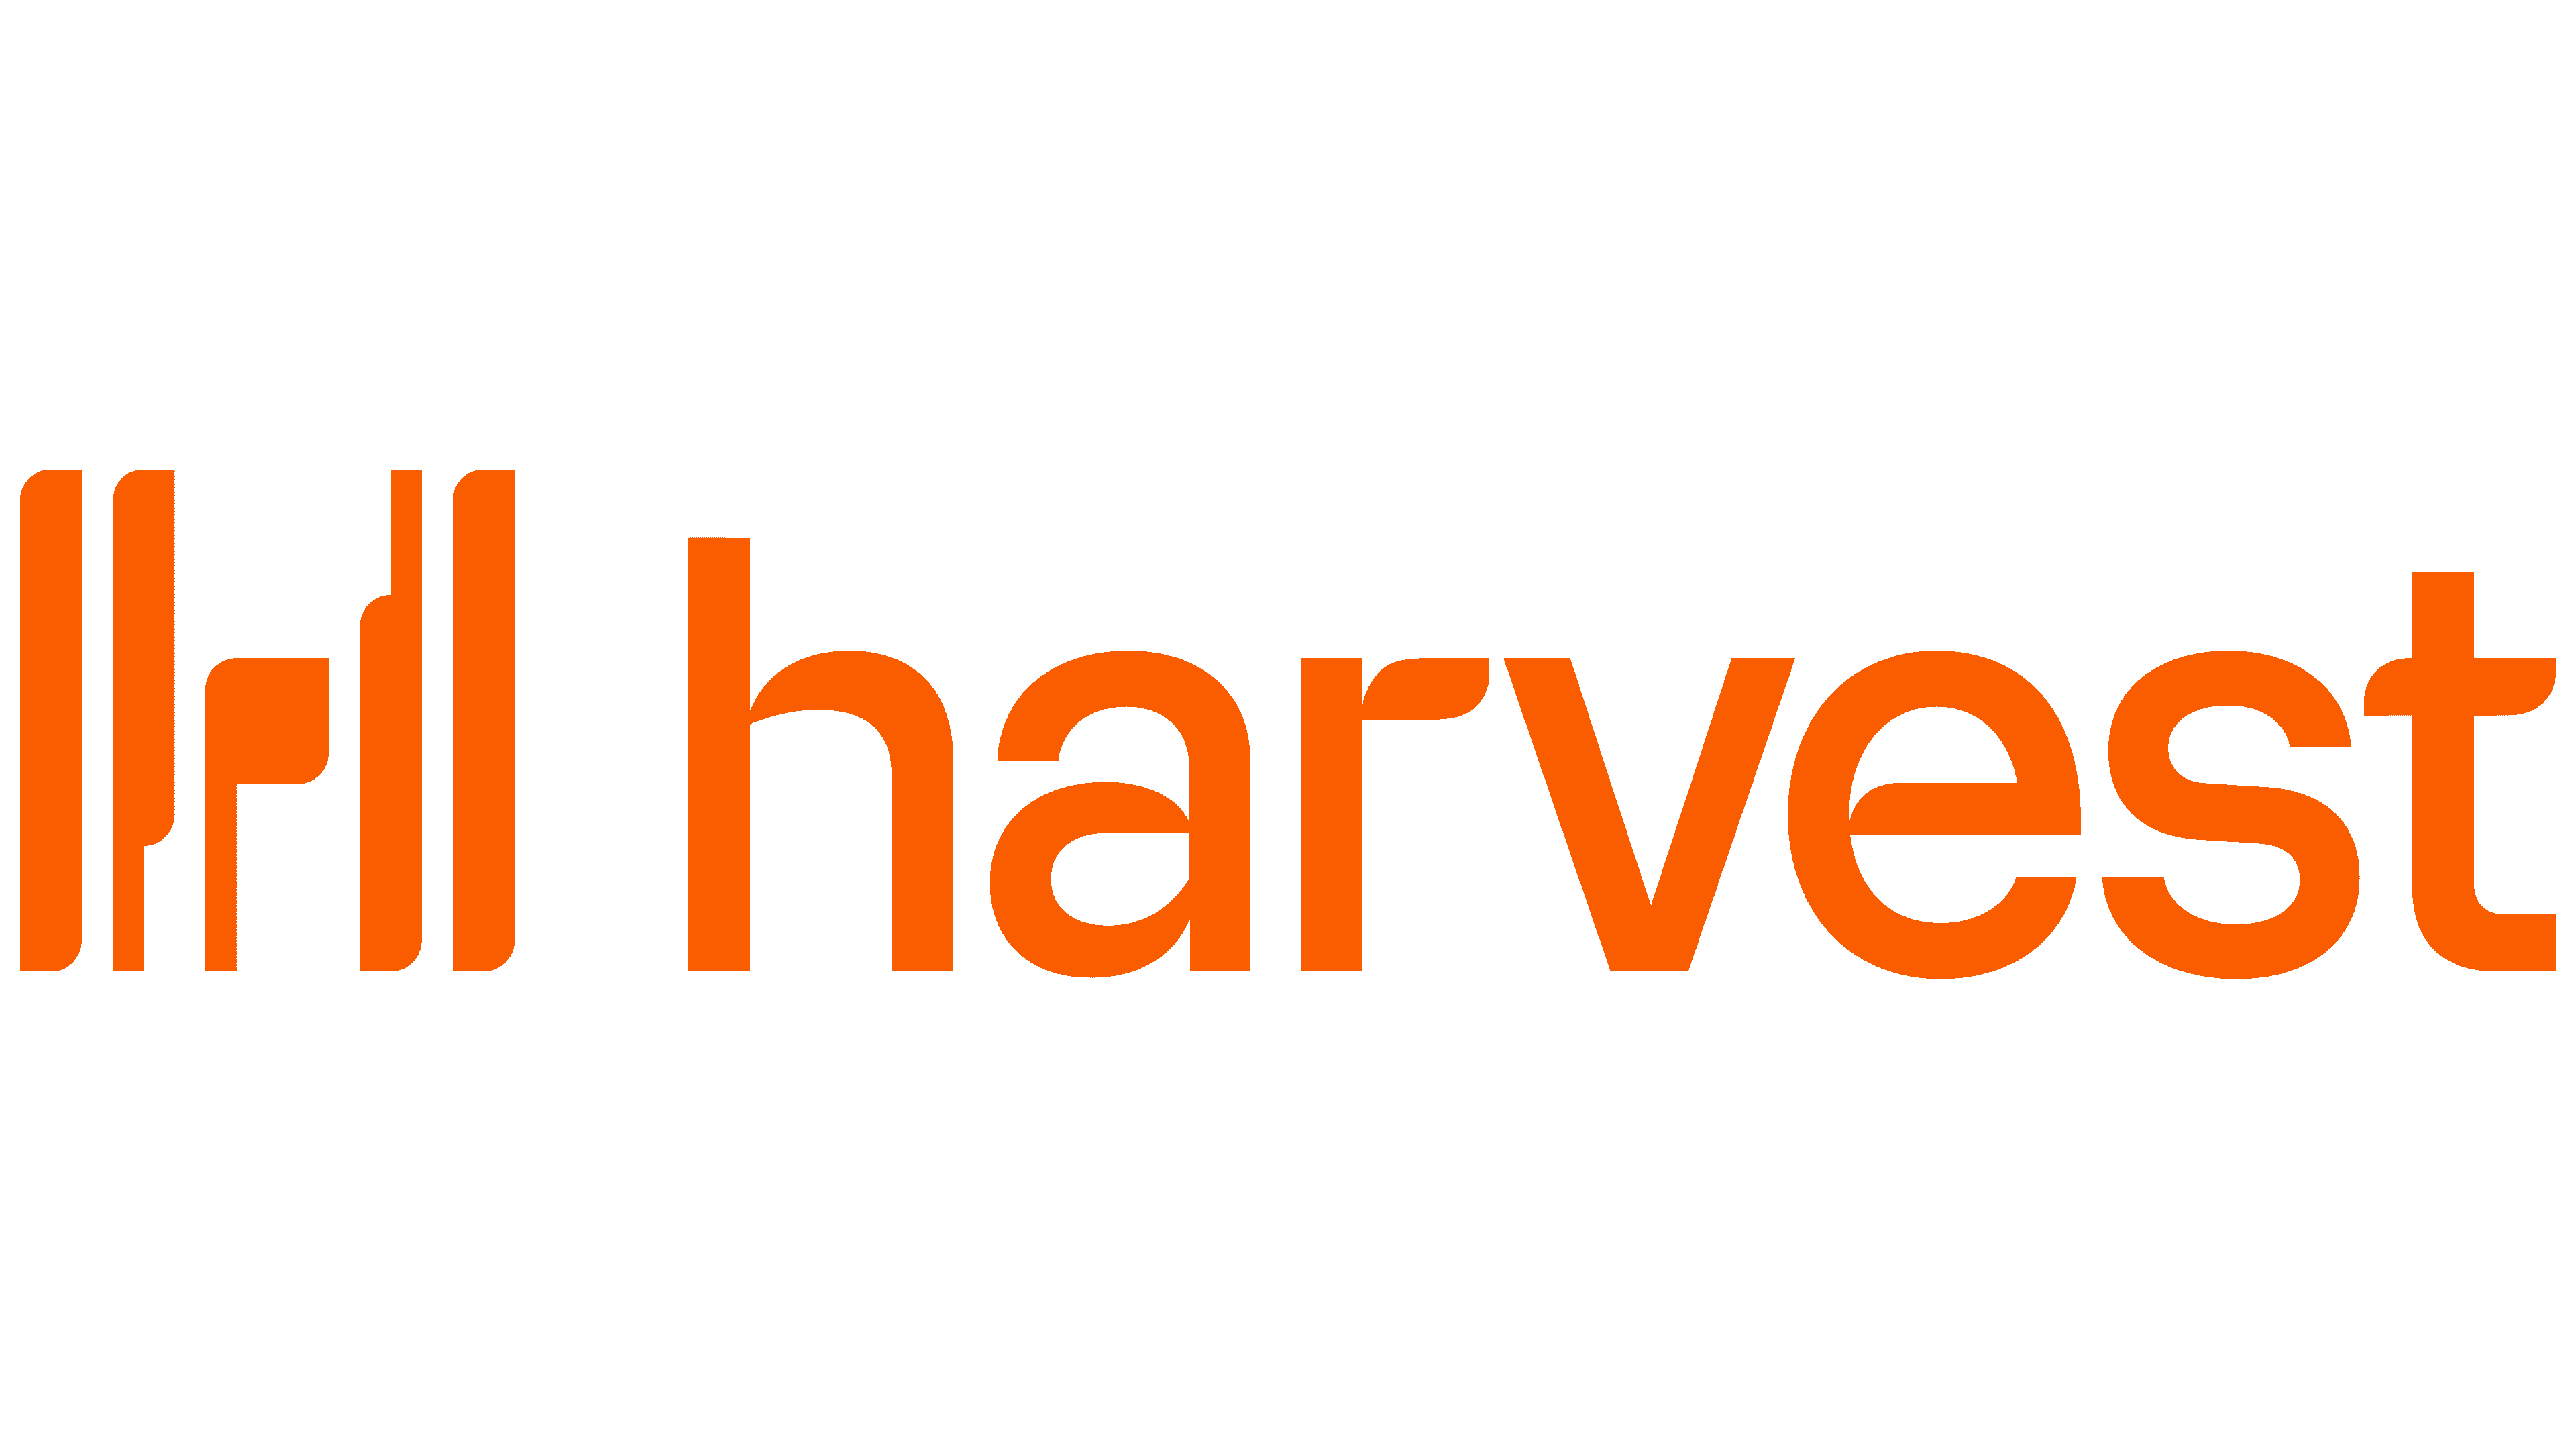 The updated Harvest logo has become more understandable and convenient